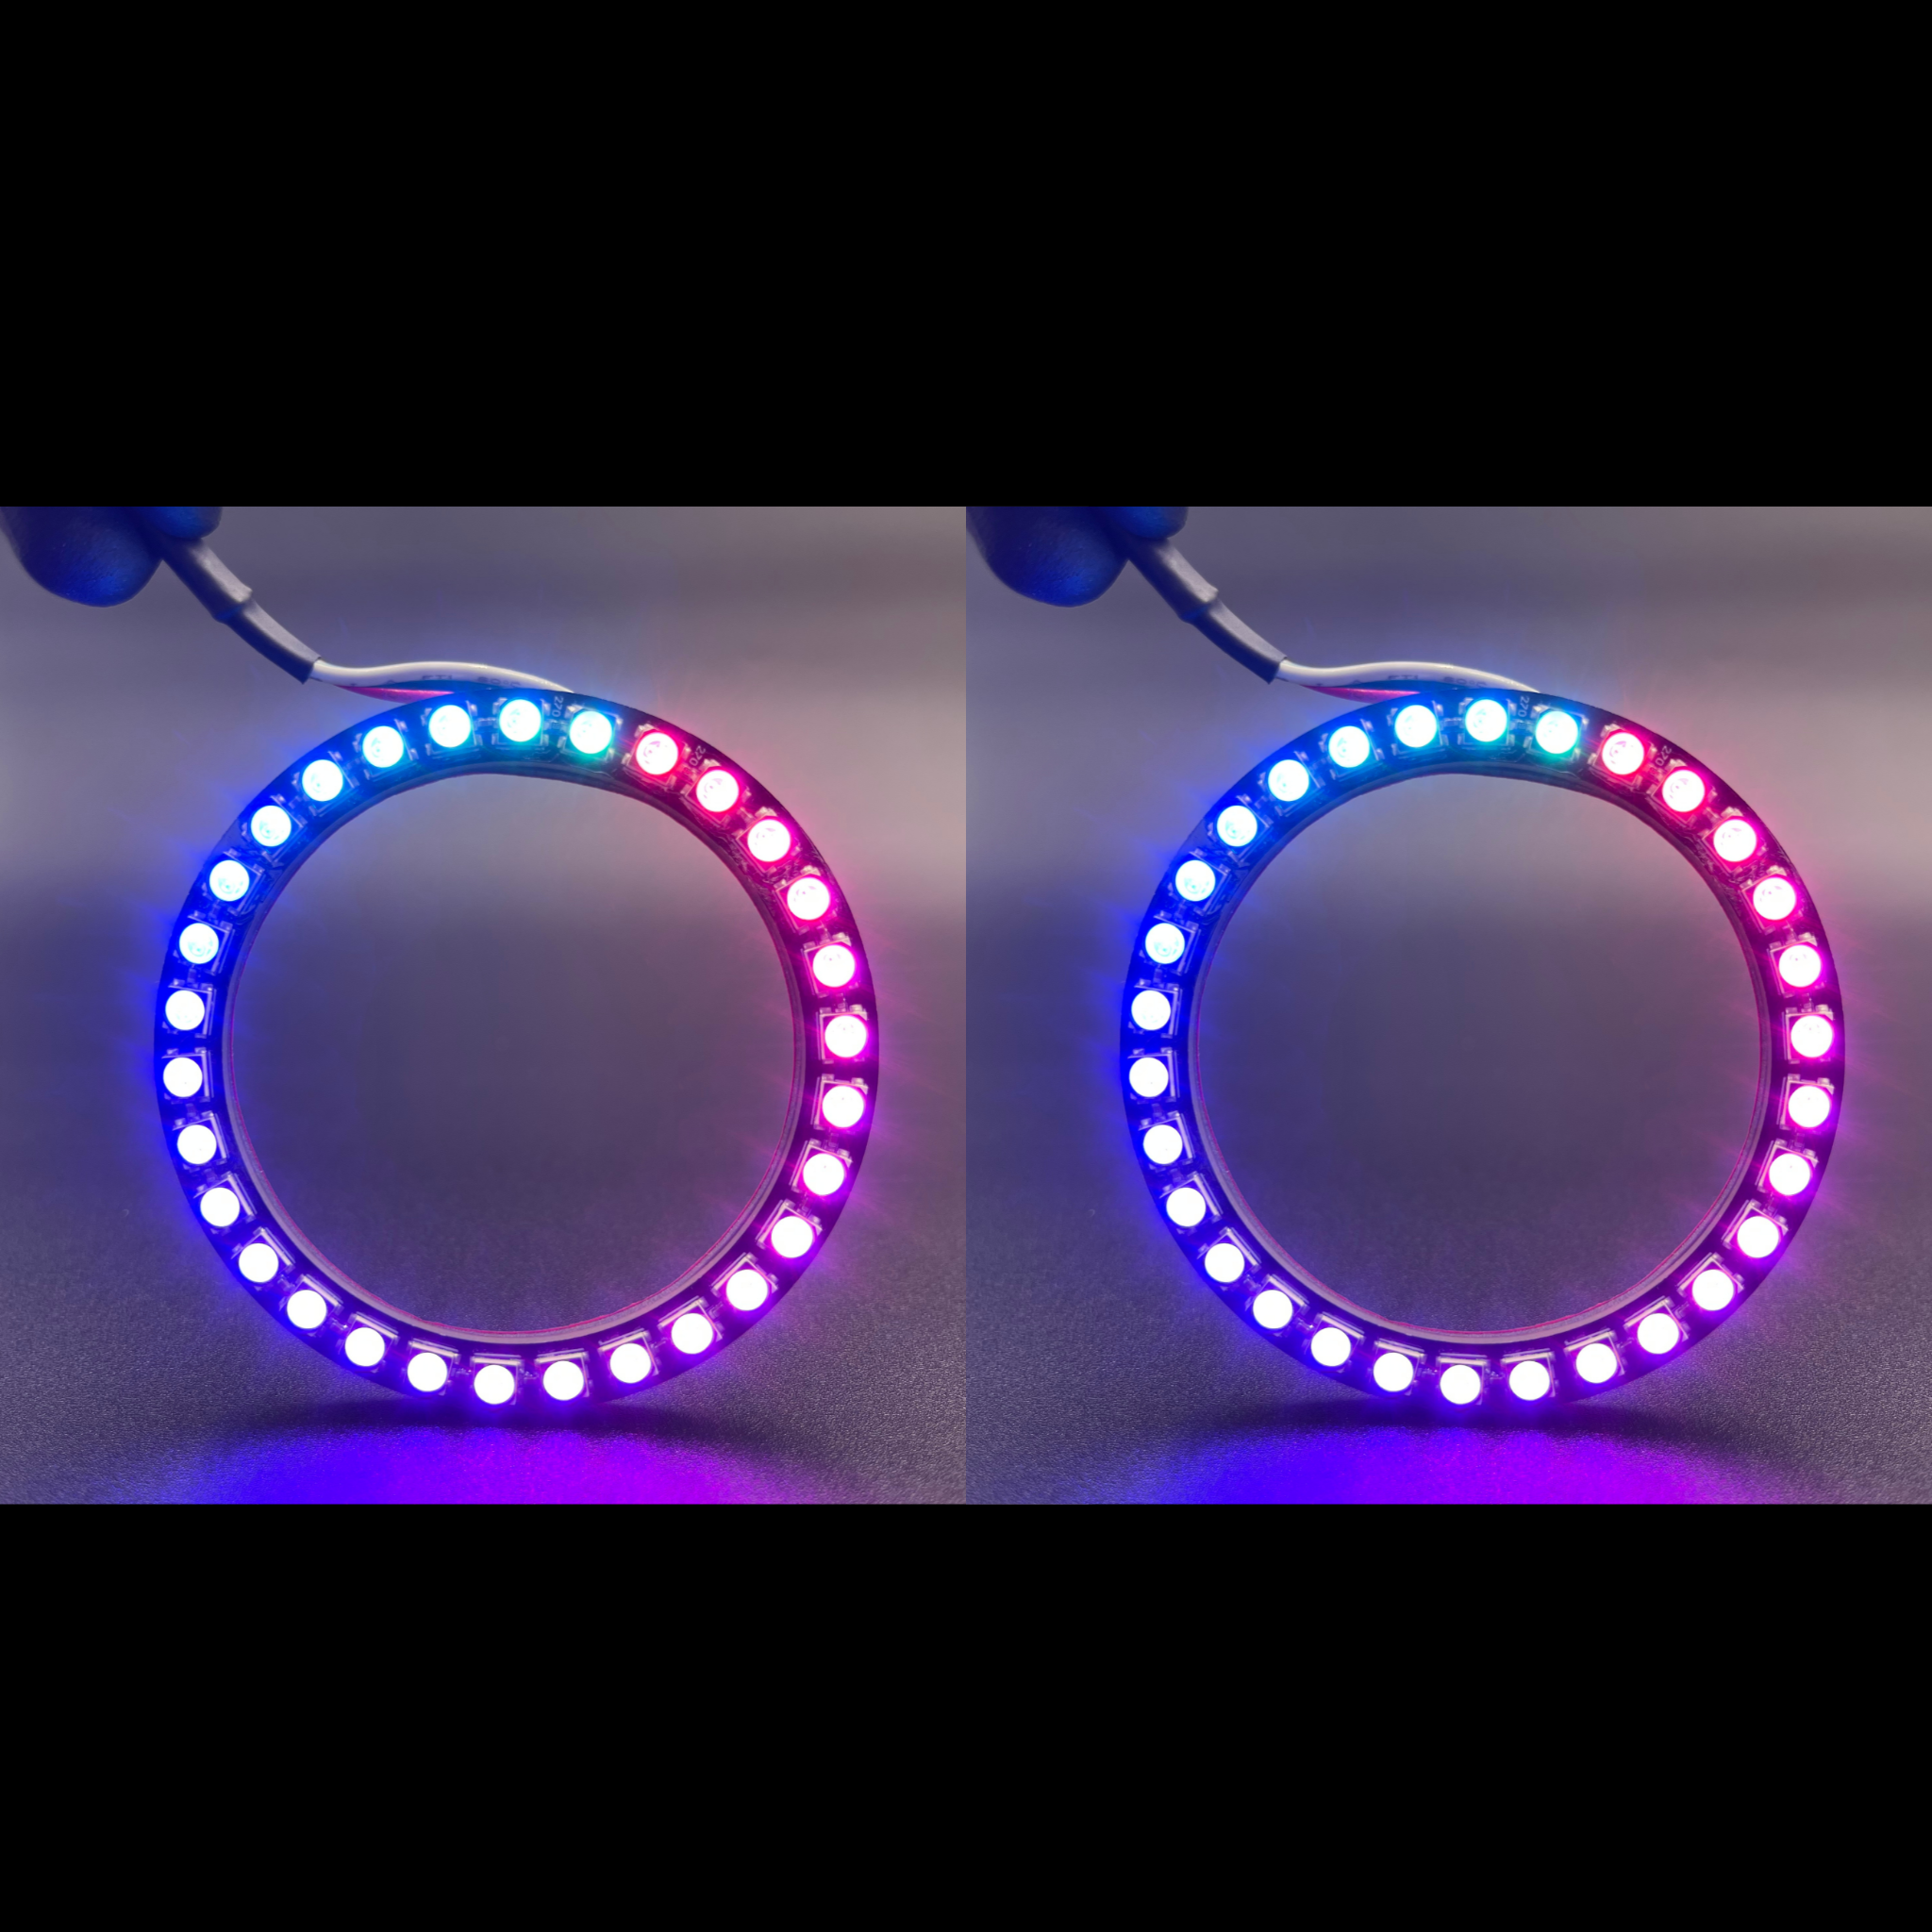 1997-2003 Ford F150 Multicolor Halo Kit - RGB Halo Kits Multicolor Flow Series Color Chasing RGBWA LED headlight kit Oracle Lighting Trendz OneUpLighting Morimoto theretrofitsource AutoLEDTech Diode Dynamics